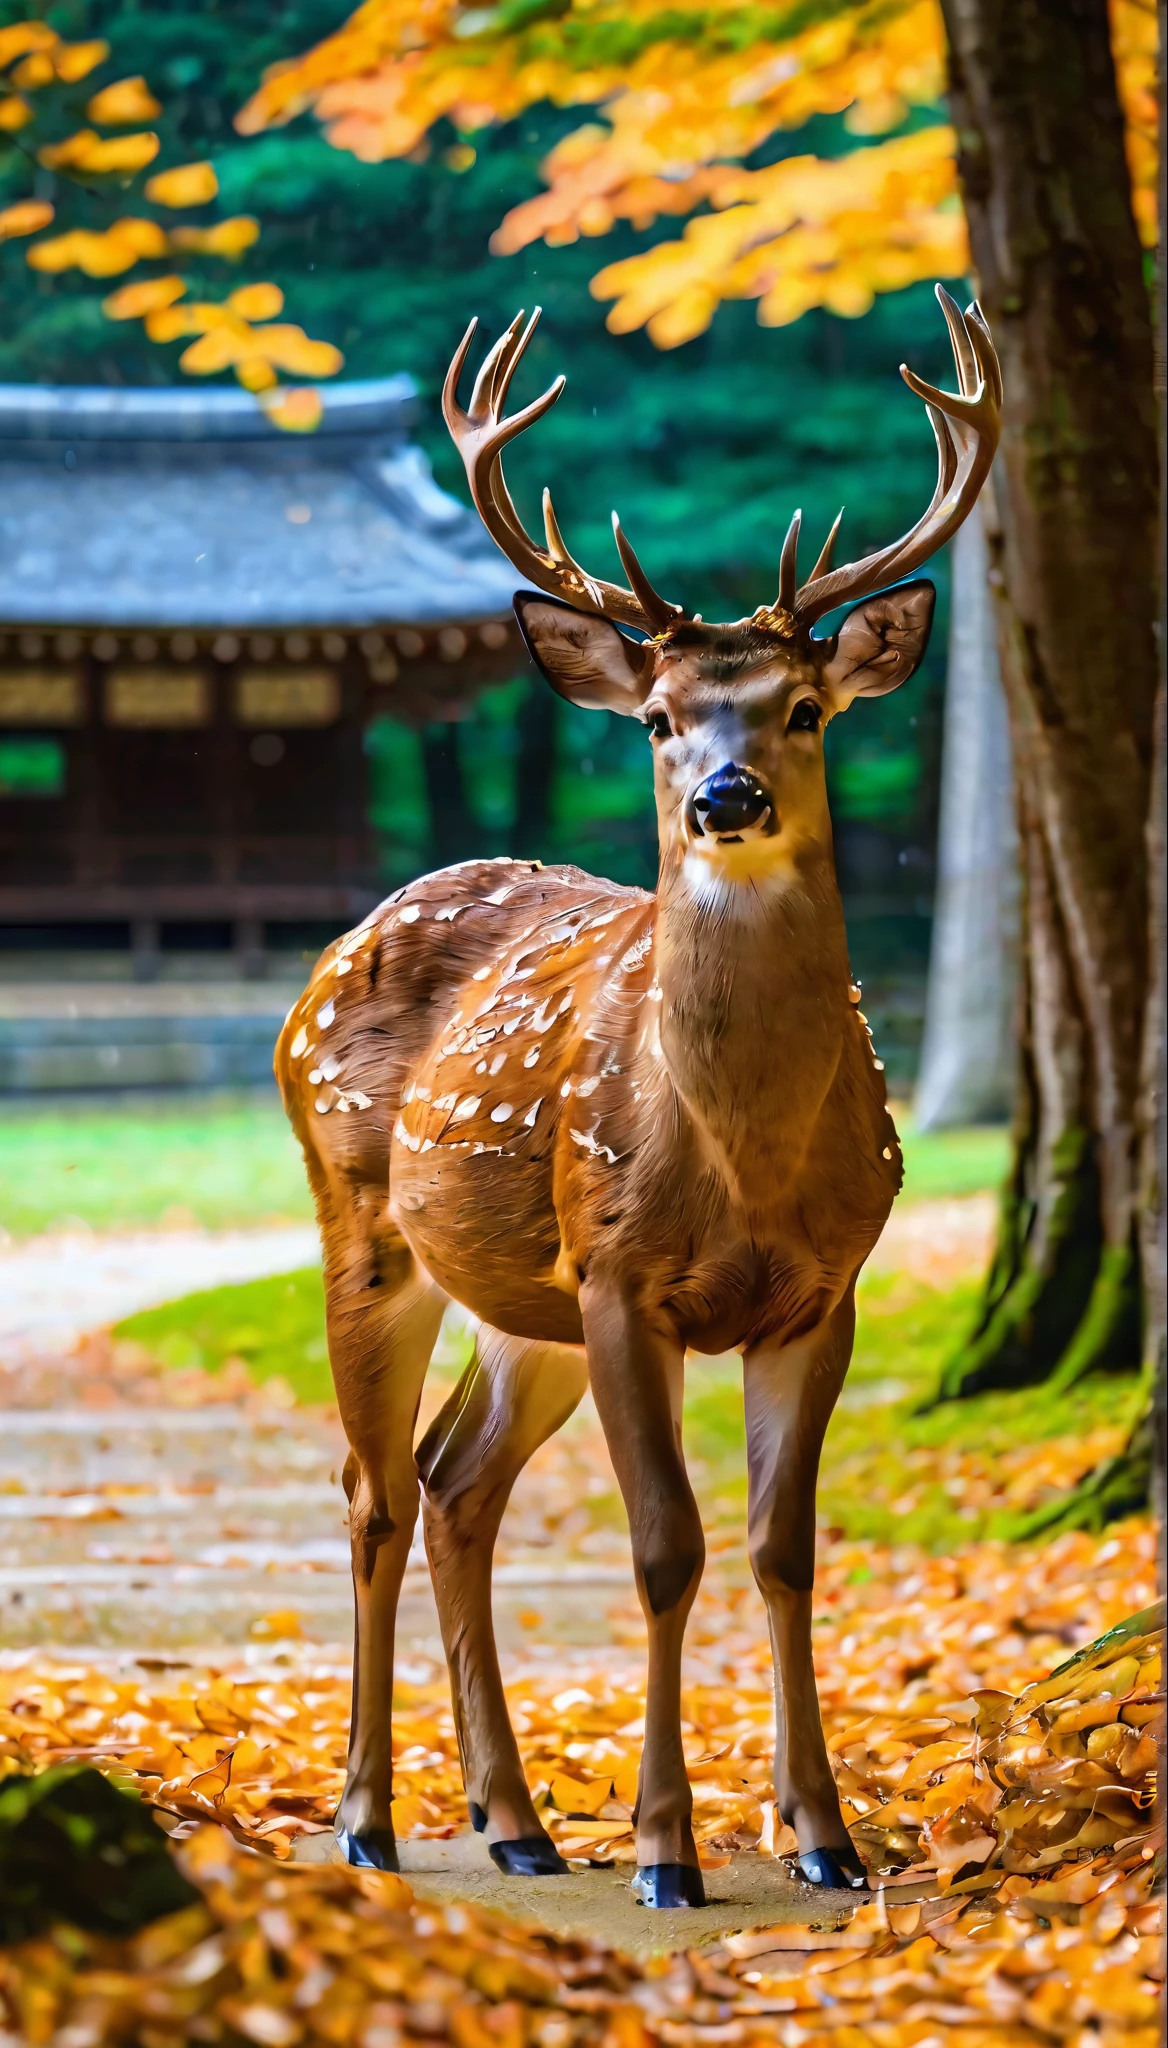 (best quality,realistic,animal photography),Sika deer at Kasuga Taisha temple in Nara(wildlife,deer,park),raw photo(reflection,autumn,lighting,bokeh),natural colors(brown,green),vibrant foliage,trees in the background,lush grass,serene atmosphere,sunlight filtering through the leaves,majestic antlers,noble expression,peaceful pose,unobstructed view,sharp focus(moment frozen in time),dewdrops on the grass,autumn leaves scattered on the ground,quiet elegance,majestic beauty.